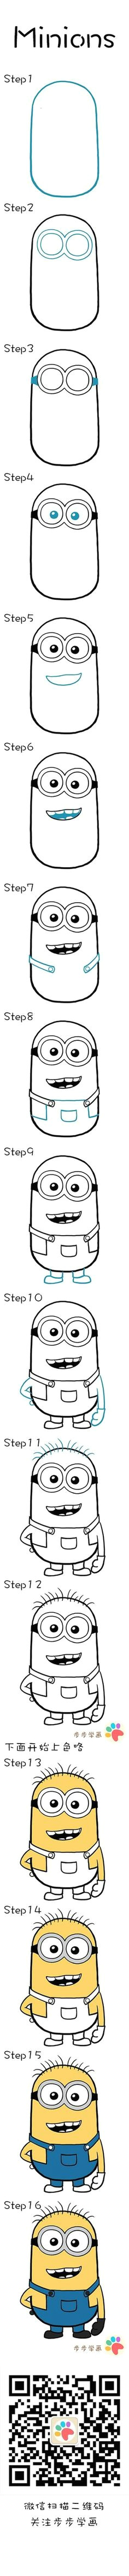 Easy Drawings Minion 29 Best Minion Drawing Images Minion Drawing Kid Drawings Learn